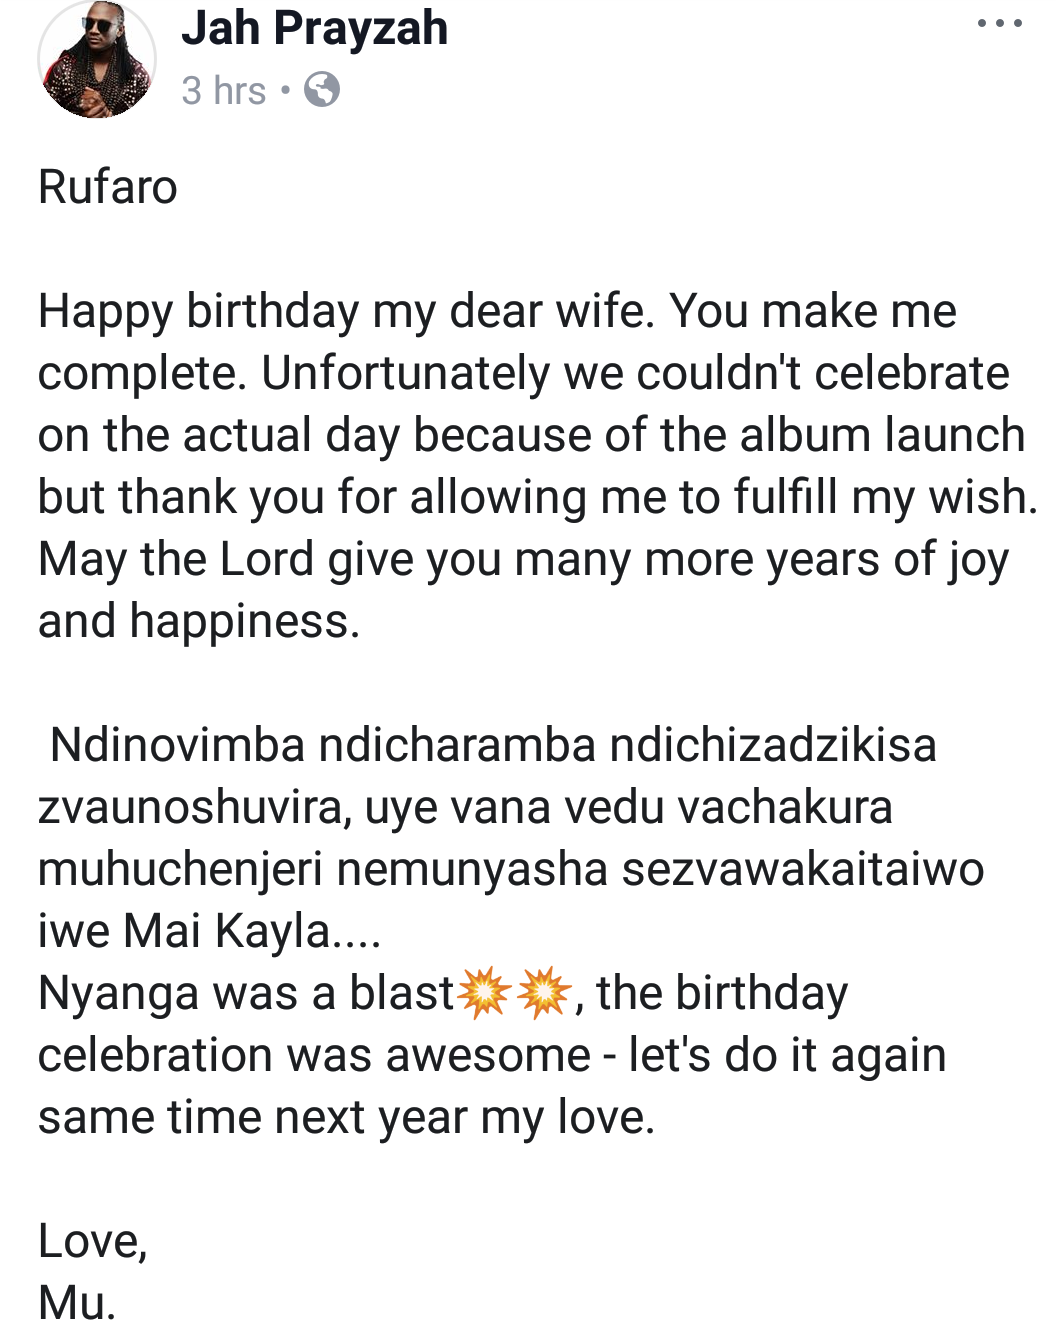 Jah Prayzah Birthday Message To His Wife 1.png